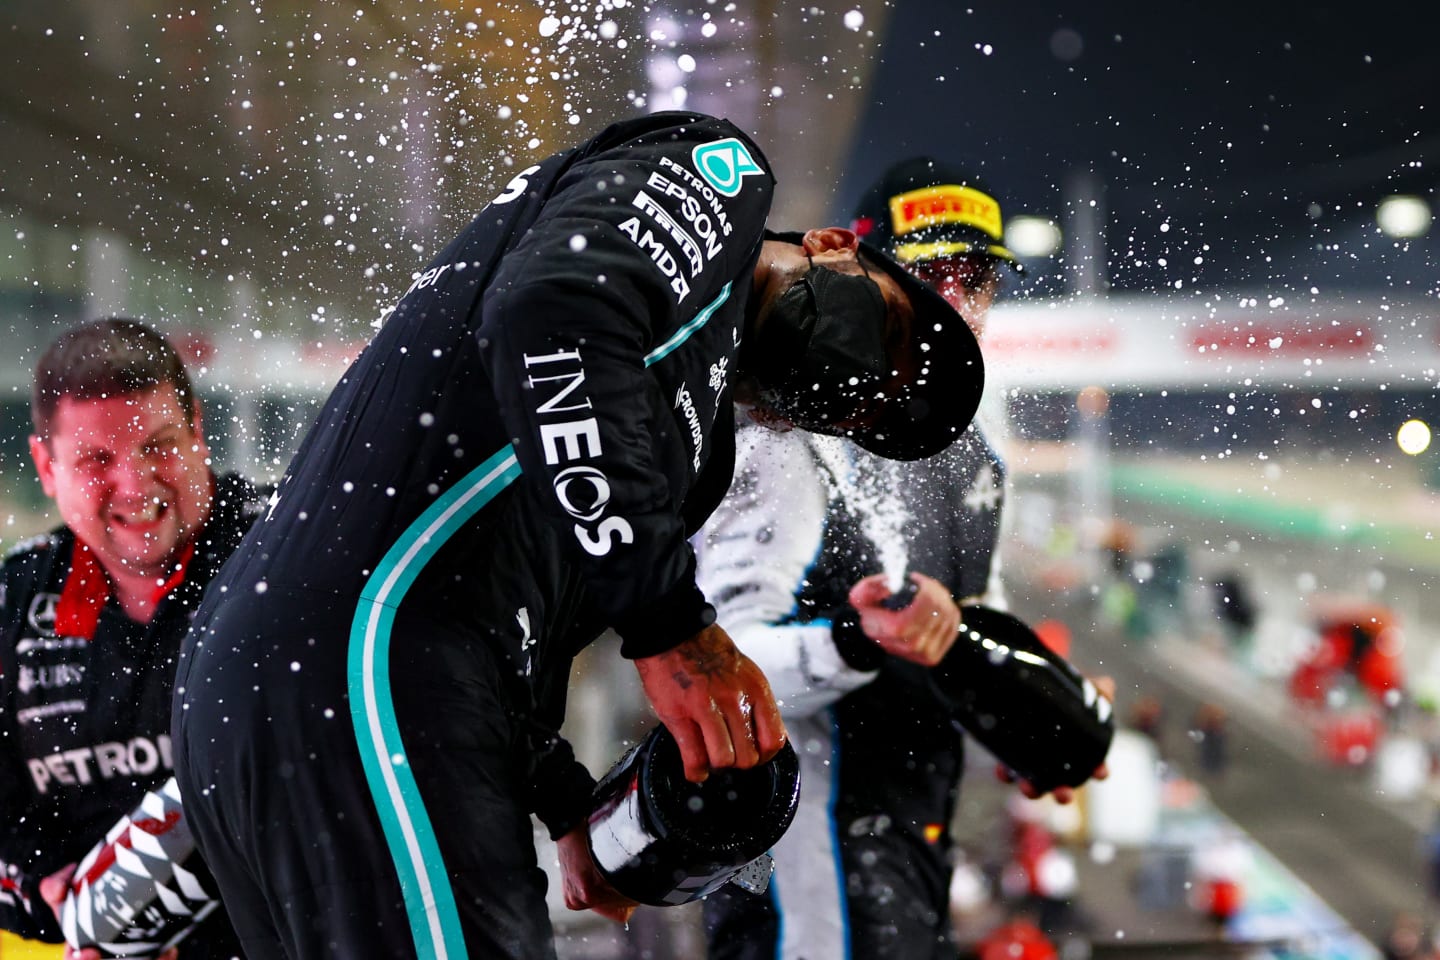 DOHA, QATAR - NOVEMBER 21: Race winner Lewis Hamilton of Great Britain and Mercedes GP, Second placed Max Verstappen of Netherlands and Red Bull Racing and Third placed Fernando Alonso of Spain and Alpine F1 Team celebrate on the podium during the F1 Grand Prix of Qatar at Losail International Circuit on November 21, 2021 in Doha, Qatar. (Photo by Dan Istitene - Formula 1/Formula 1 via Getty Images)